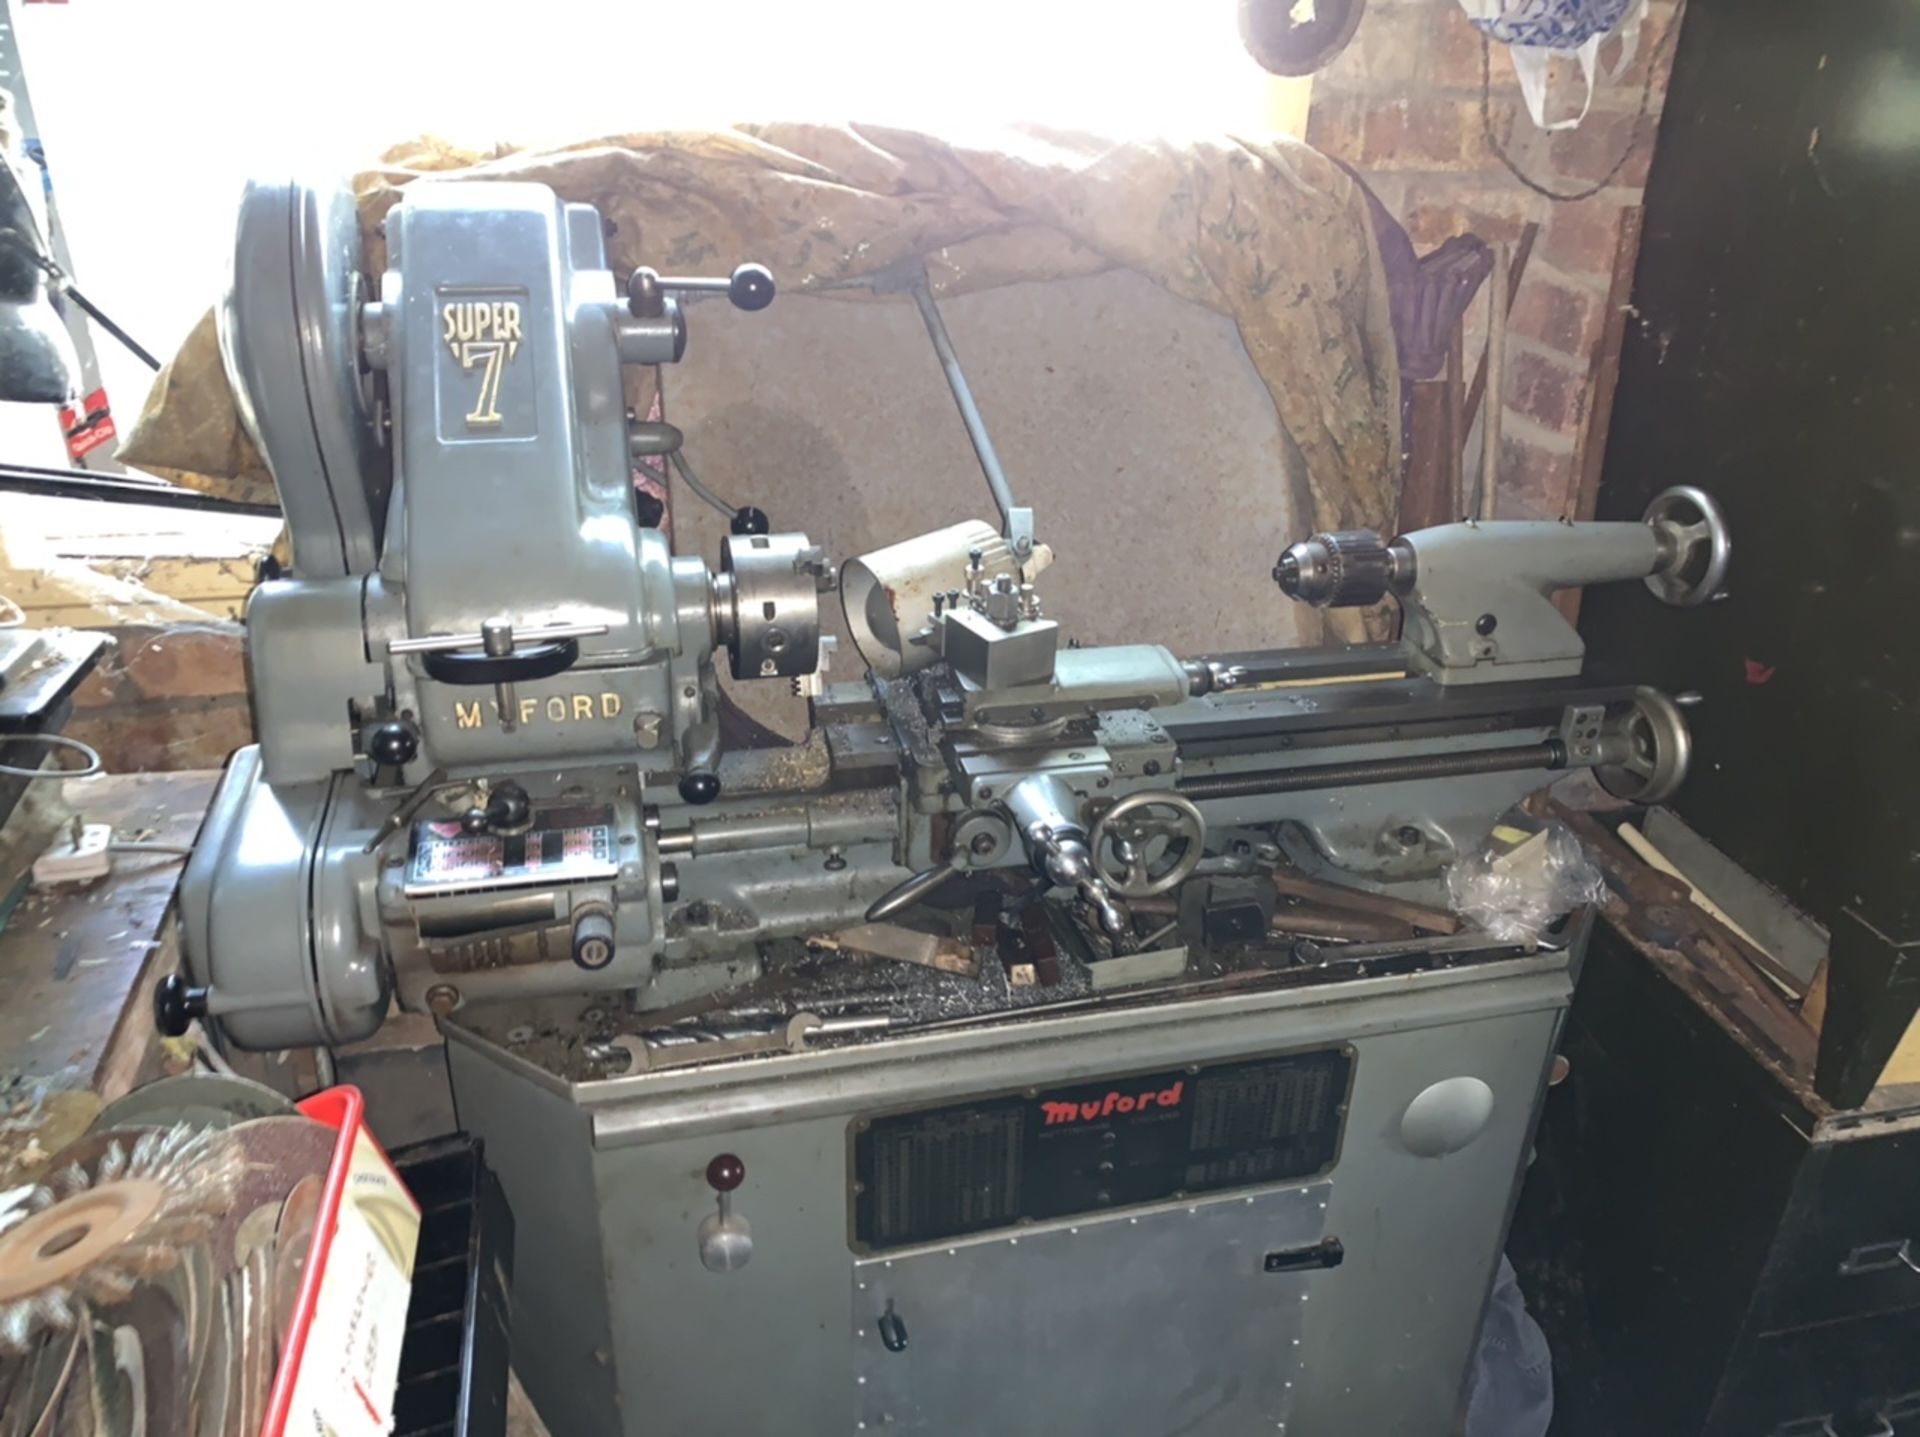 Myford Super 7 lathe. PAT test failed - needs to be reflexed.